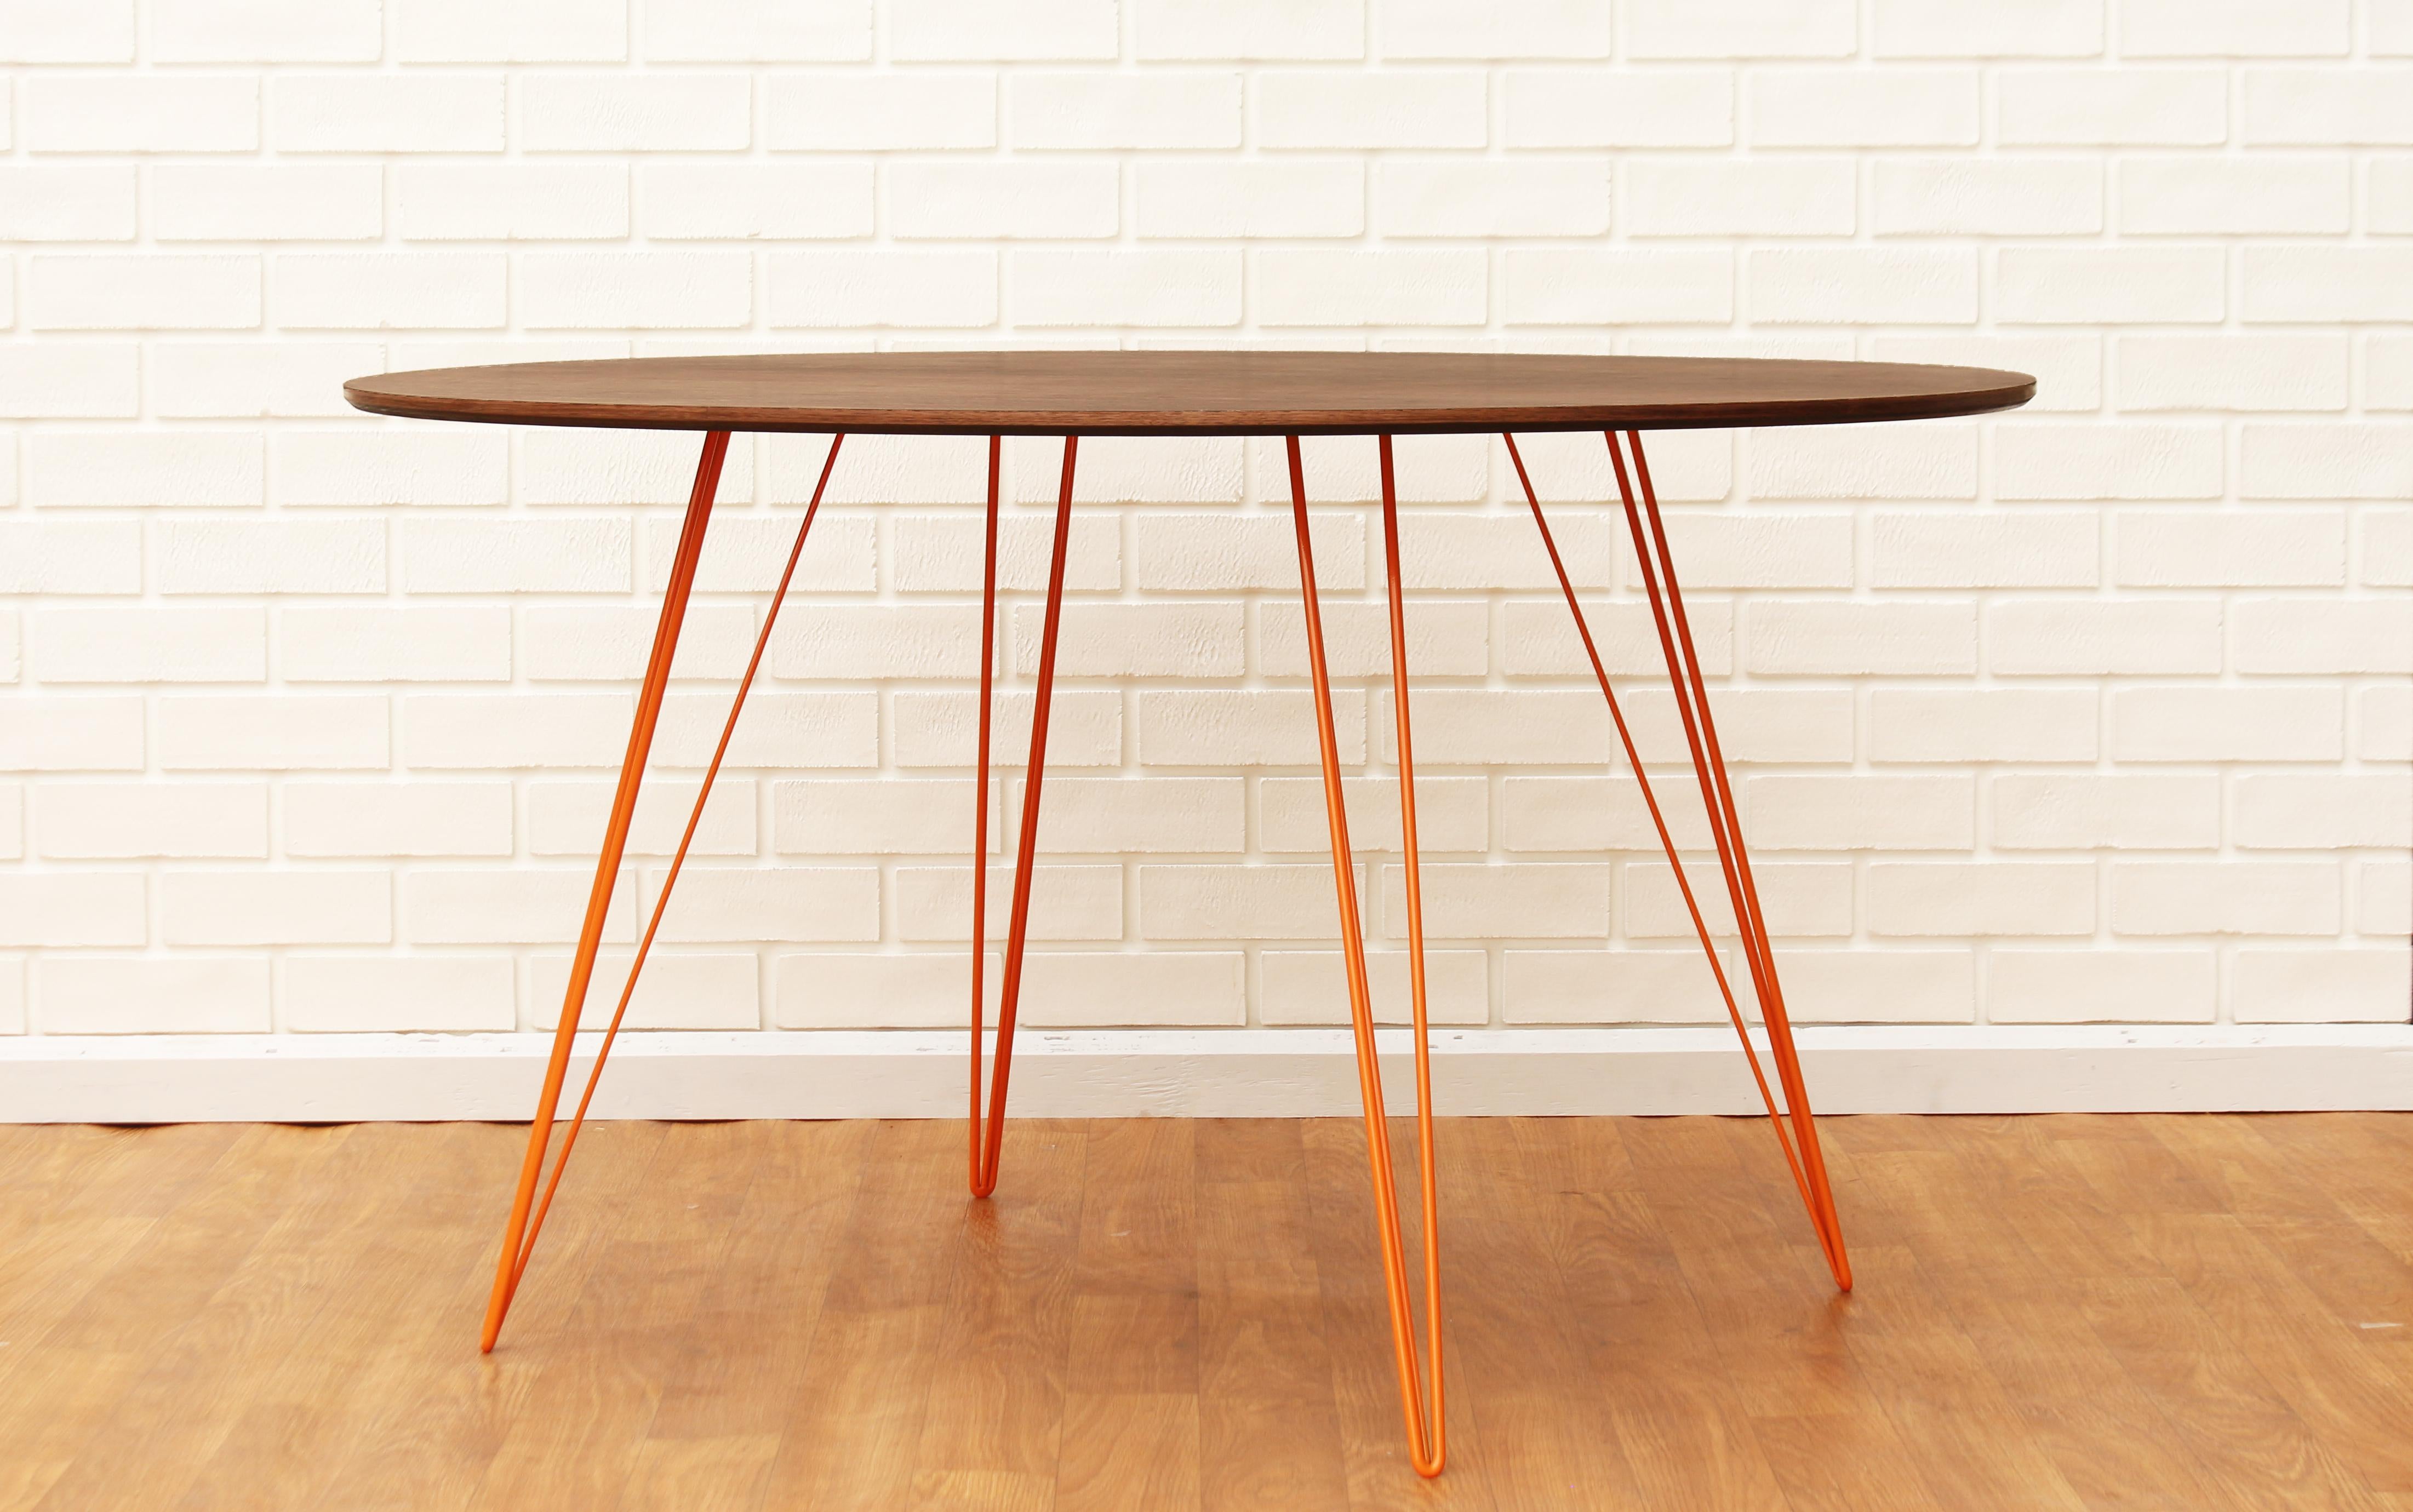 A thin, elegant and light table that can be customized to any shape, size and color desired. This handcrafted item perfectly blends industrial hairpin legs with a beveled wooden top. The irregular beauty of its natural wood combined with its simple